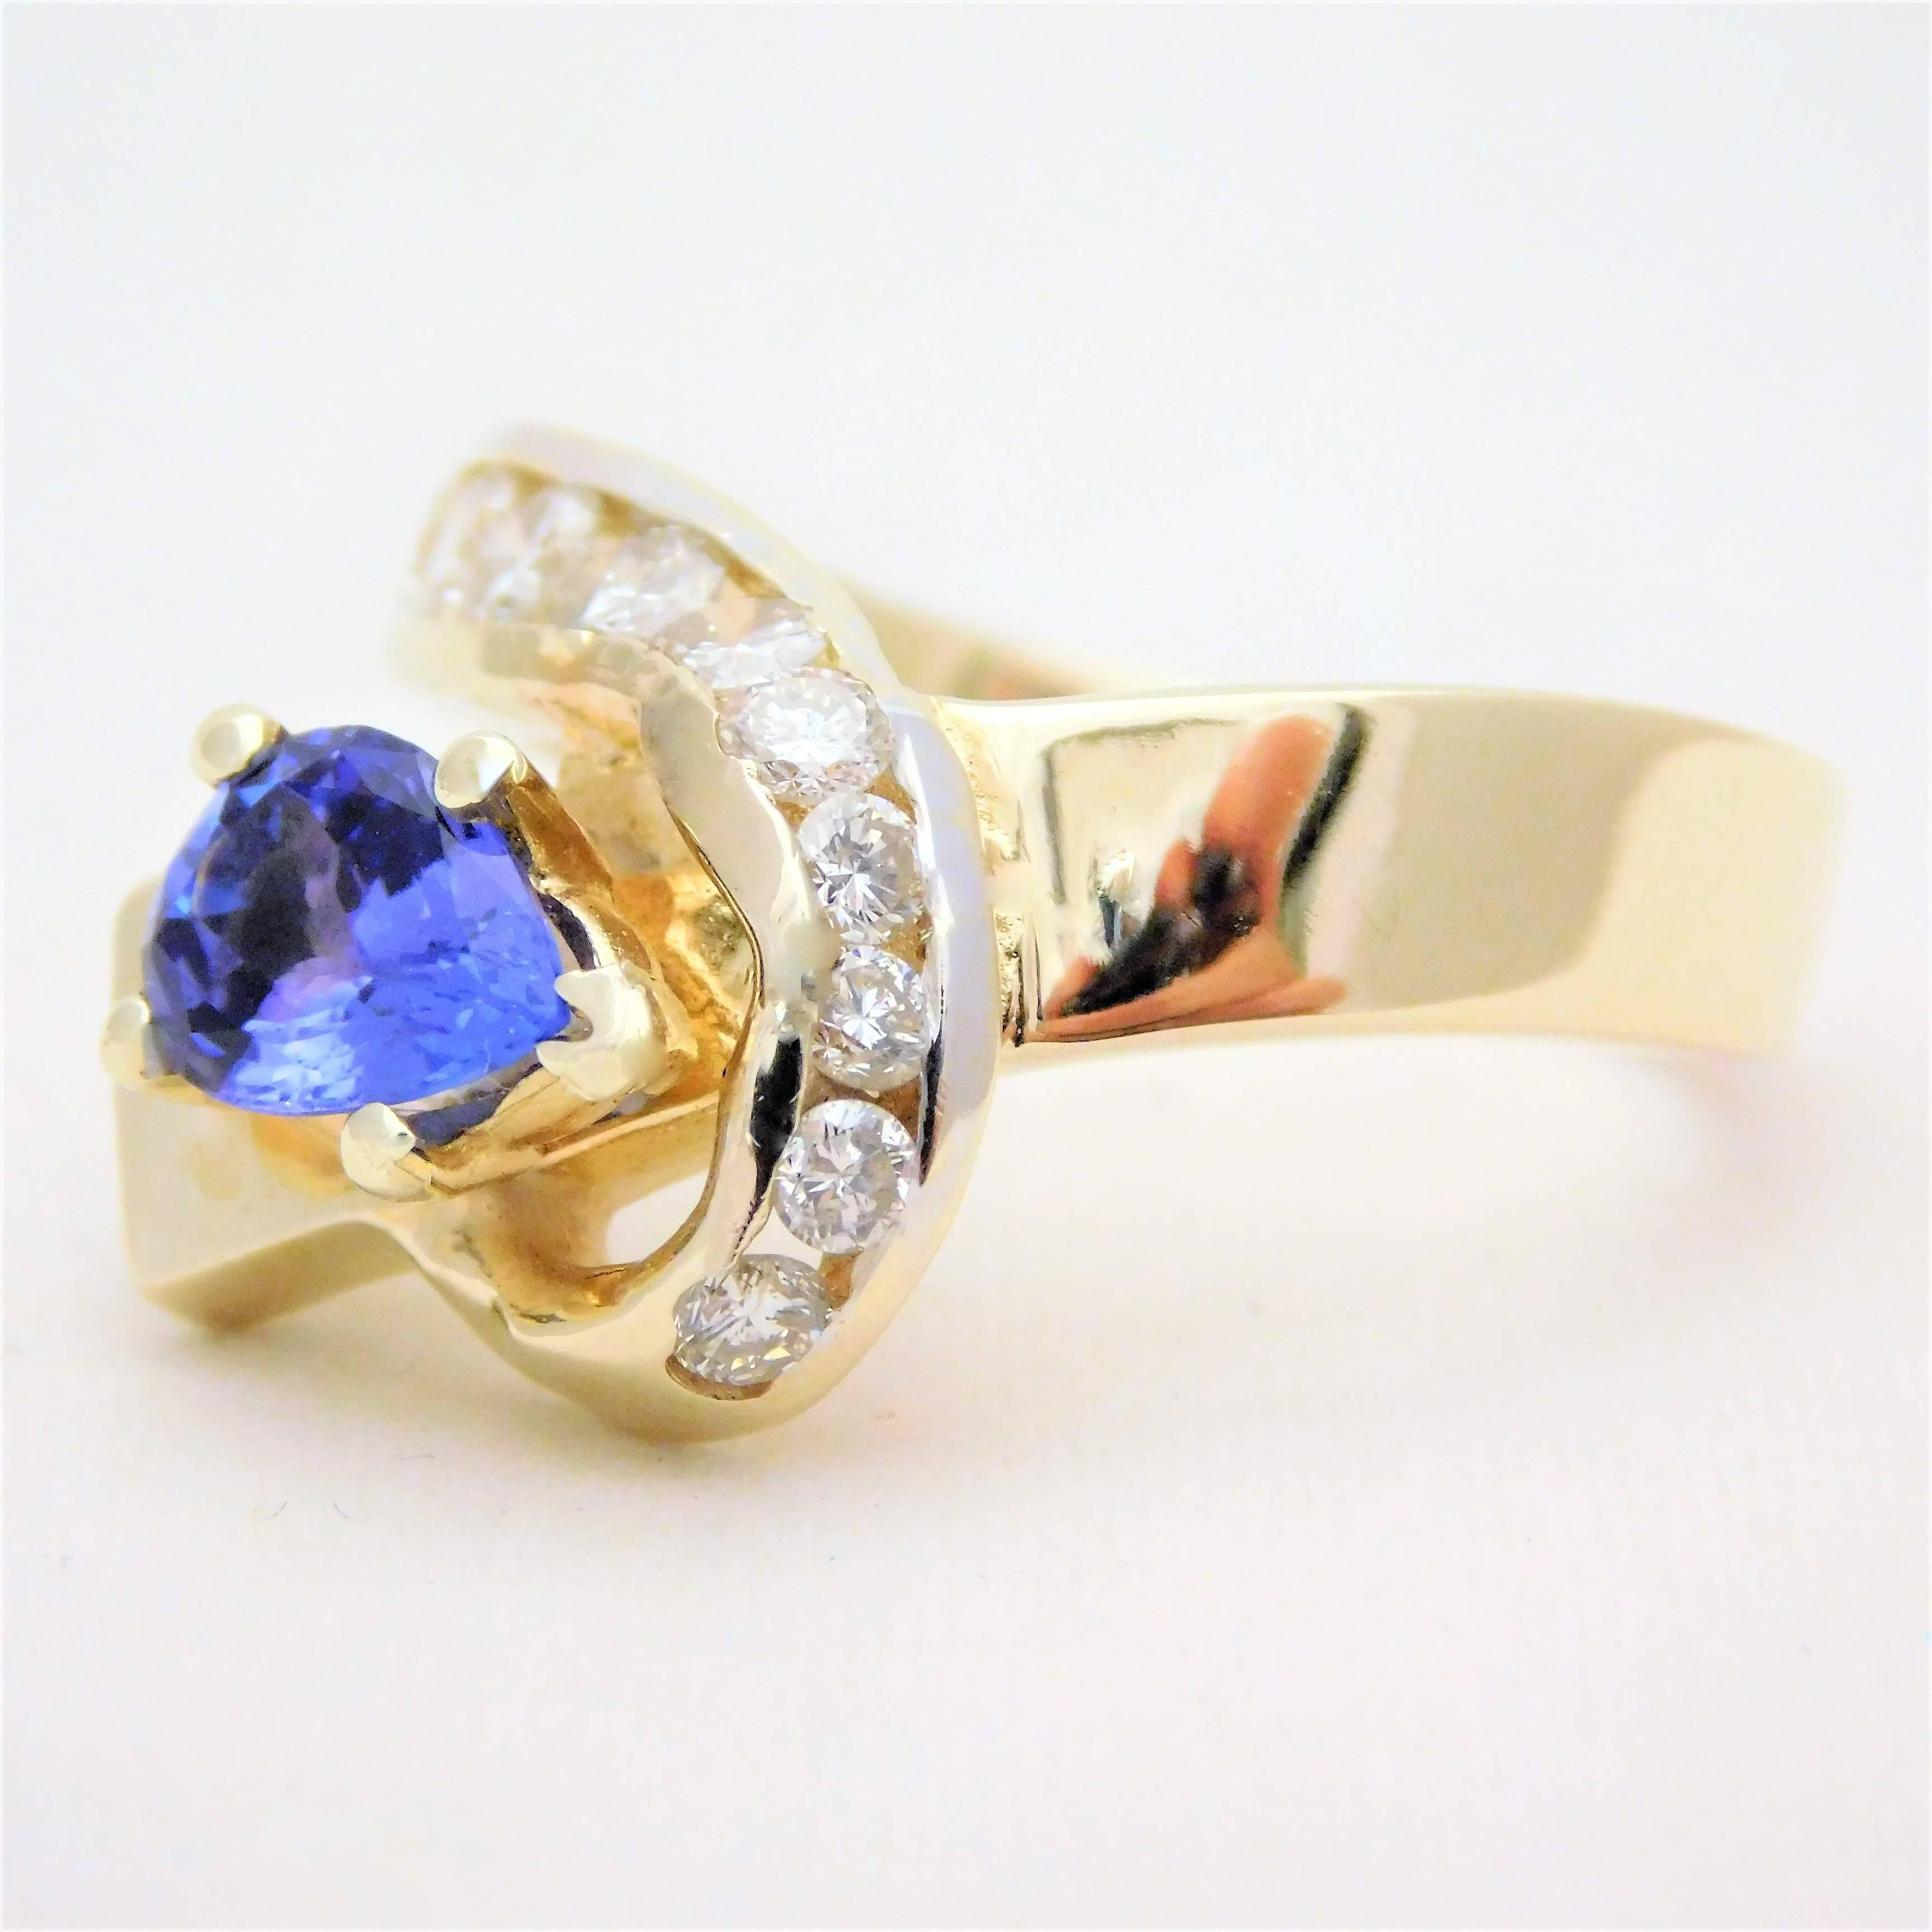 Vintage 2.05 Carat Pear-Cut Tanzanite and Diamond Cocktail Ring For Sale 4